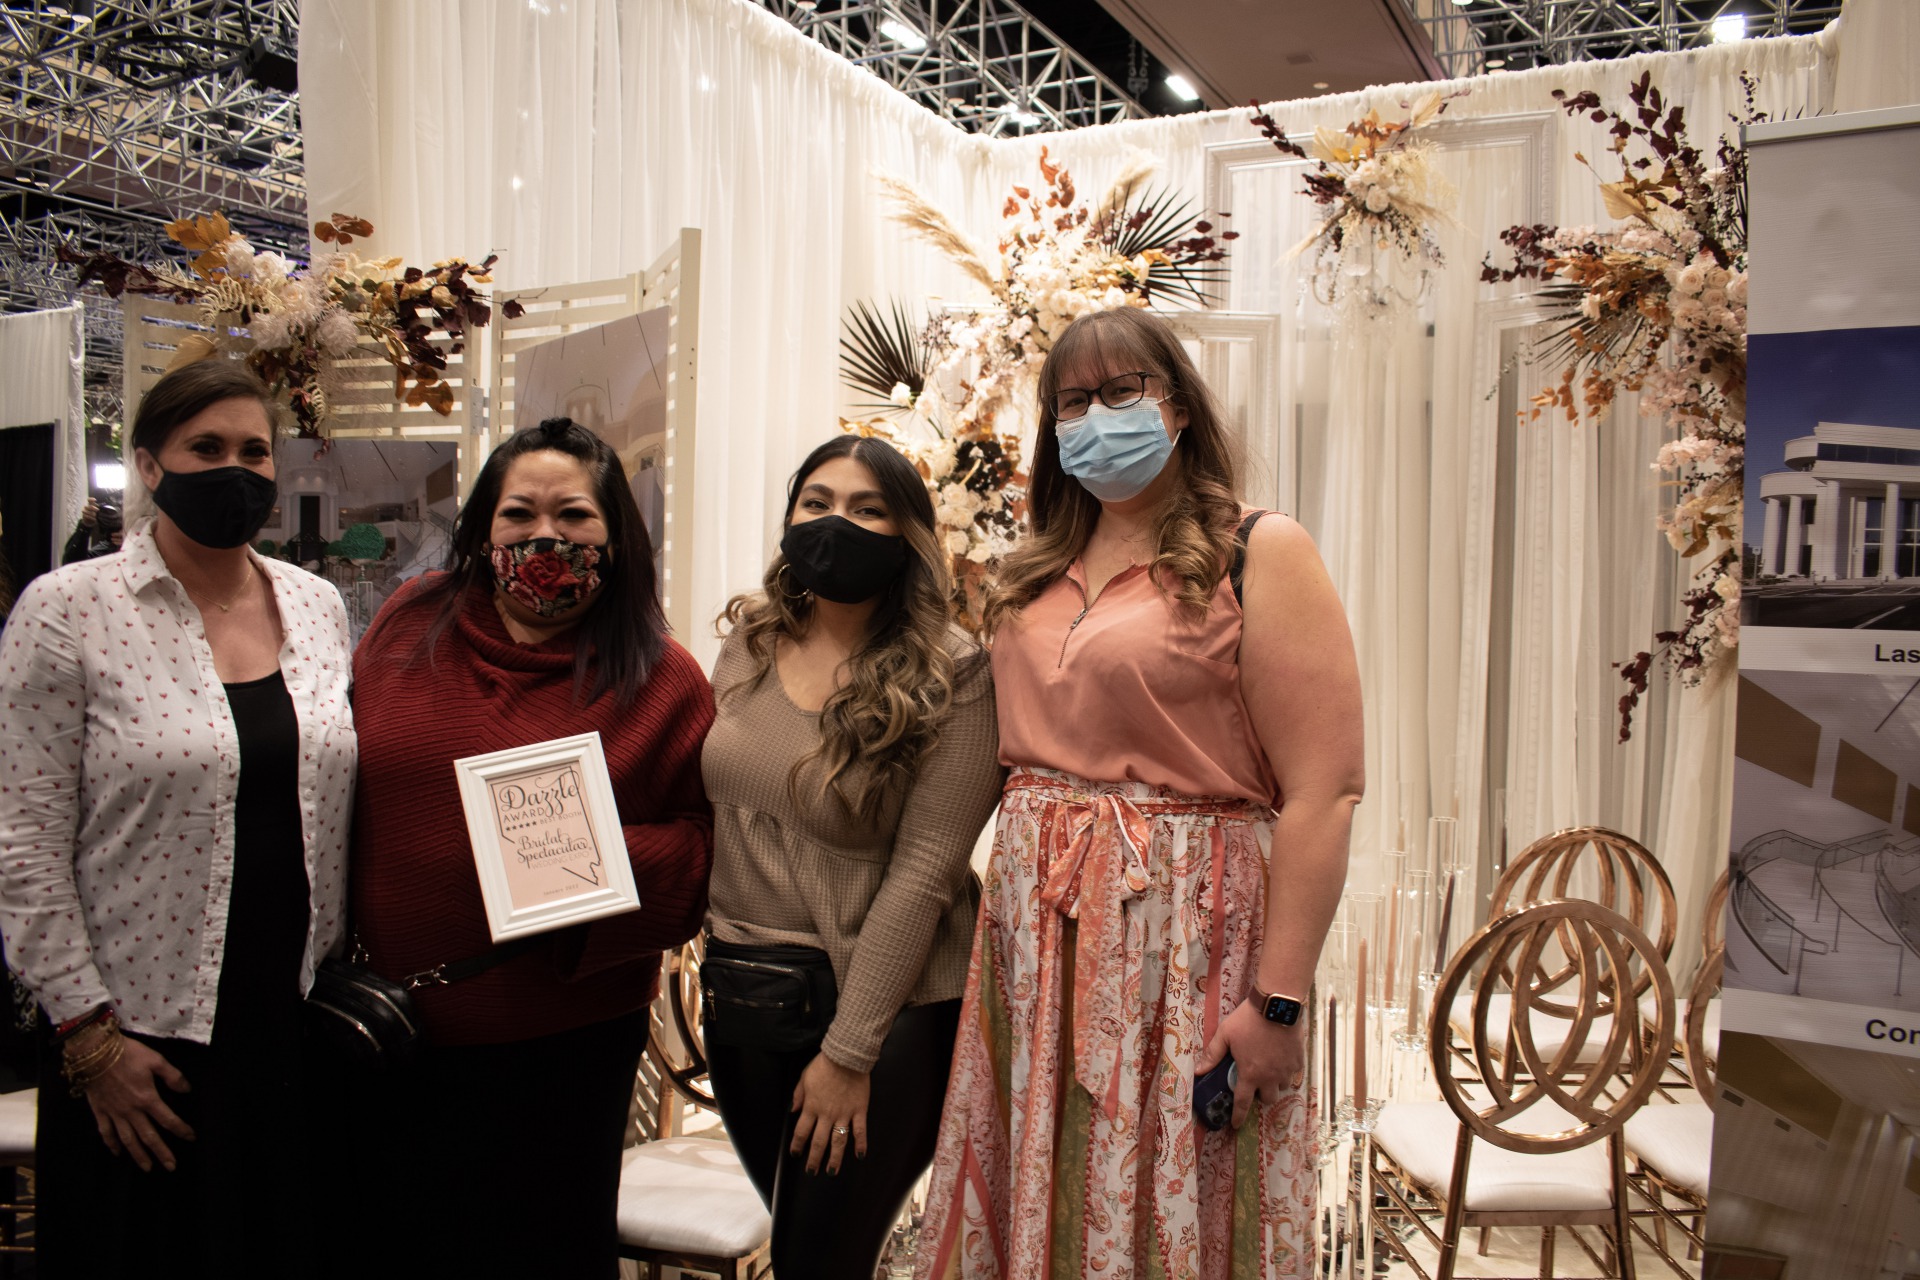 The staff at IPEC LV was excited to win the Bridal Spectacular Expo Dazzle Award